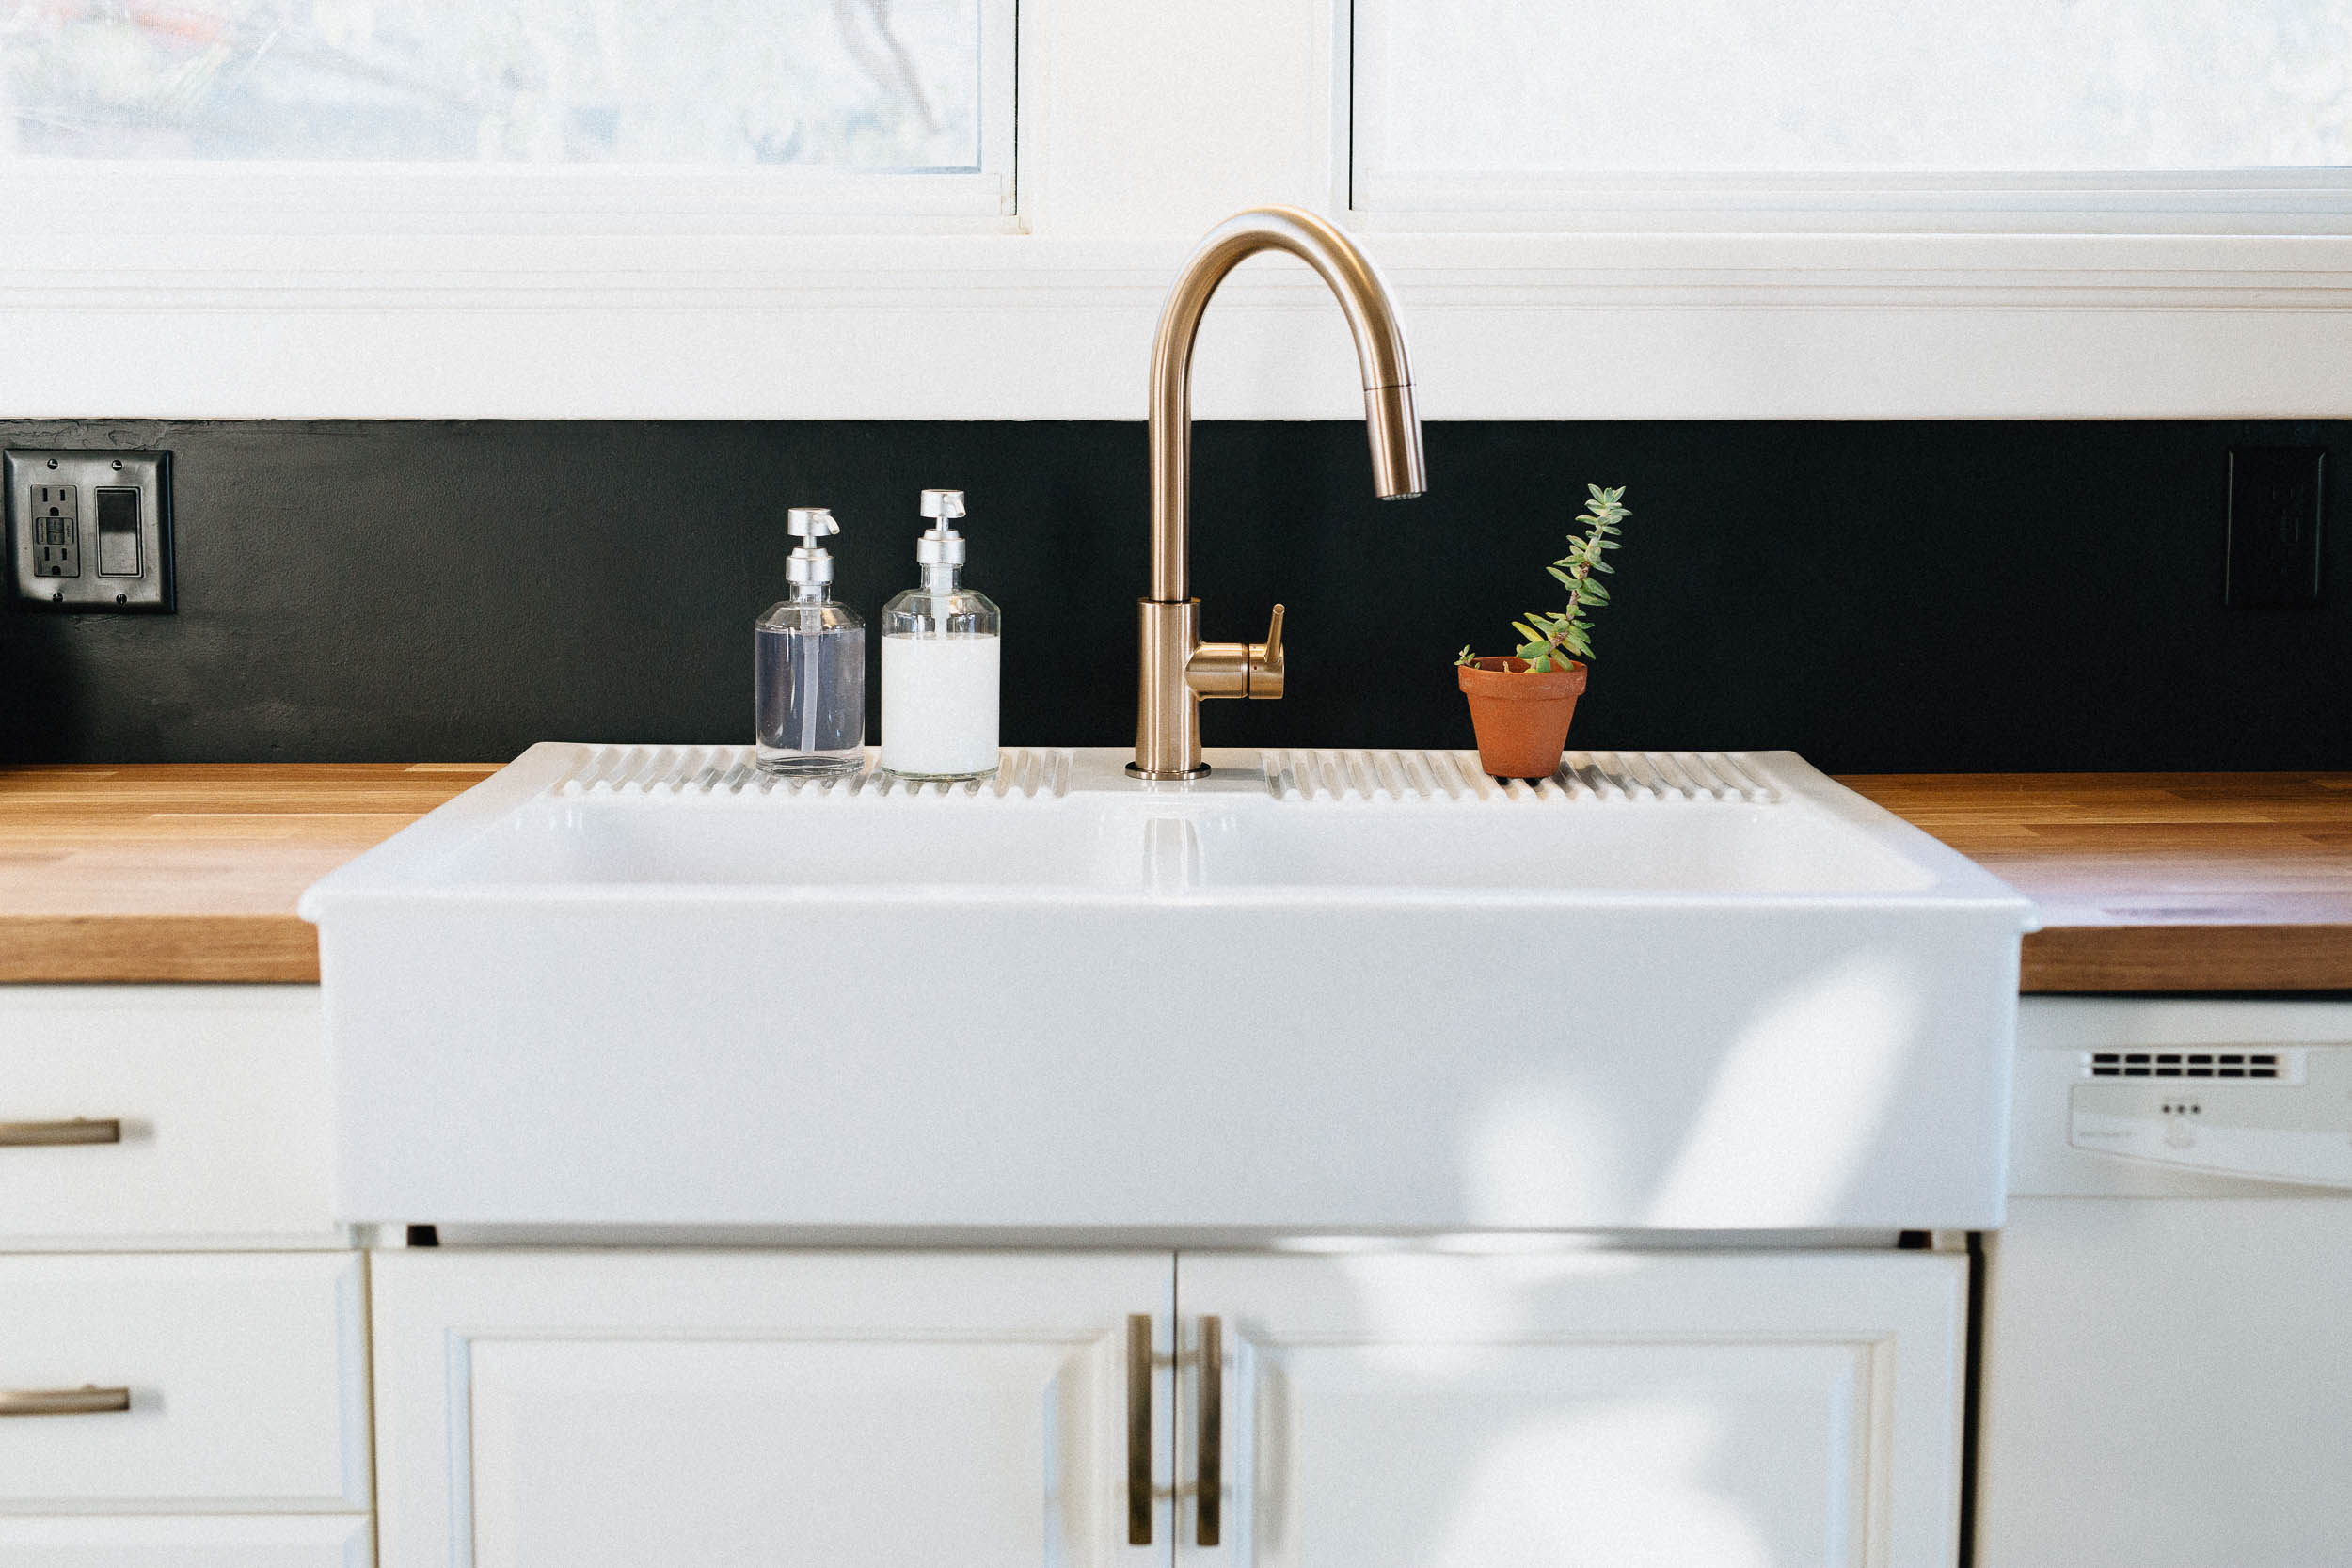 Modern Black and White Kitchen - Farmhouse Sink with Gold Faucet